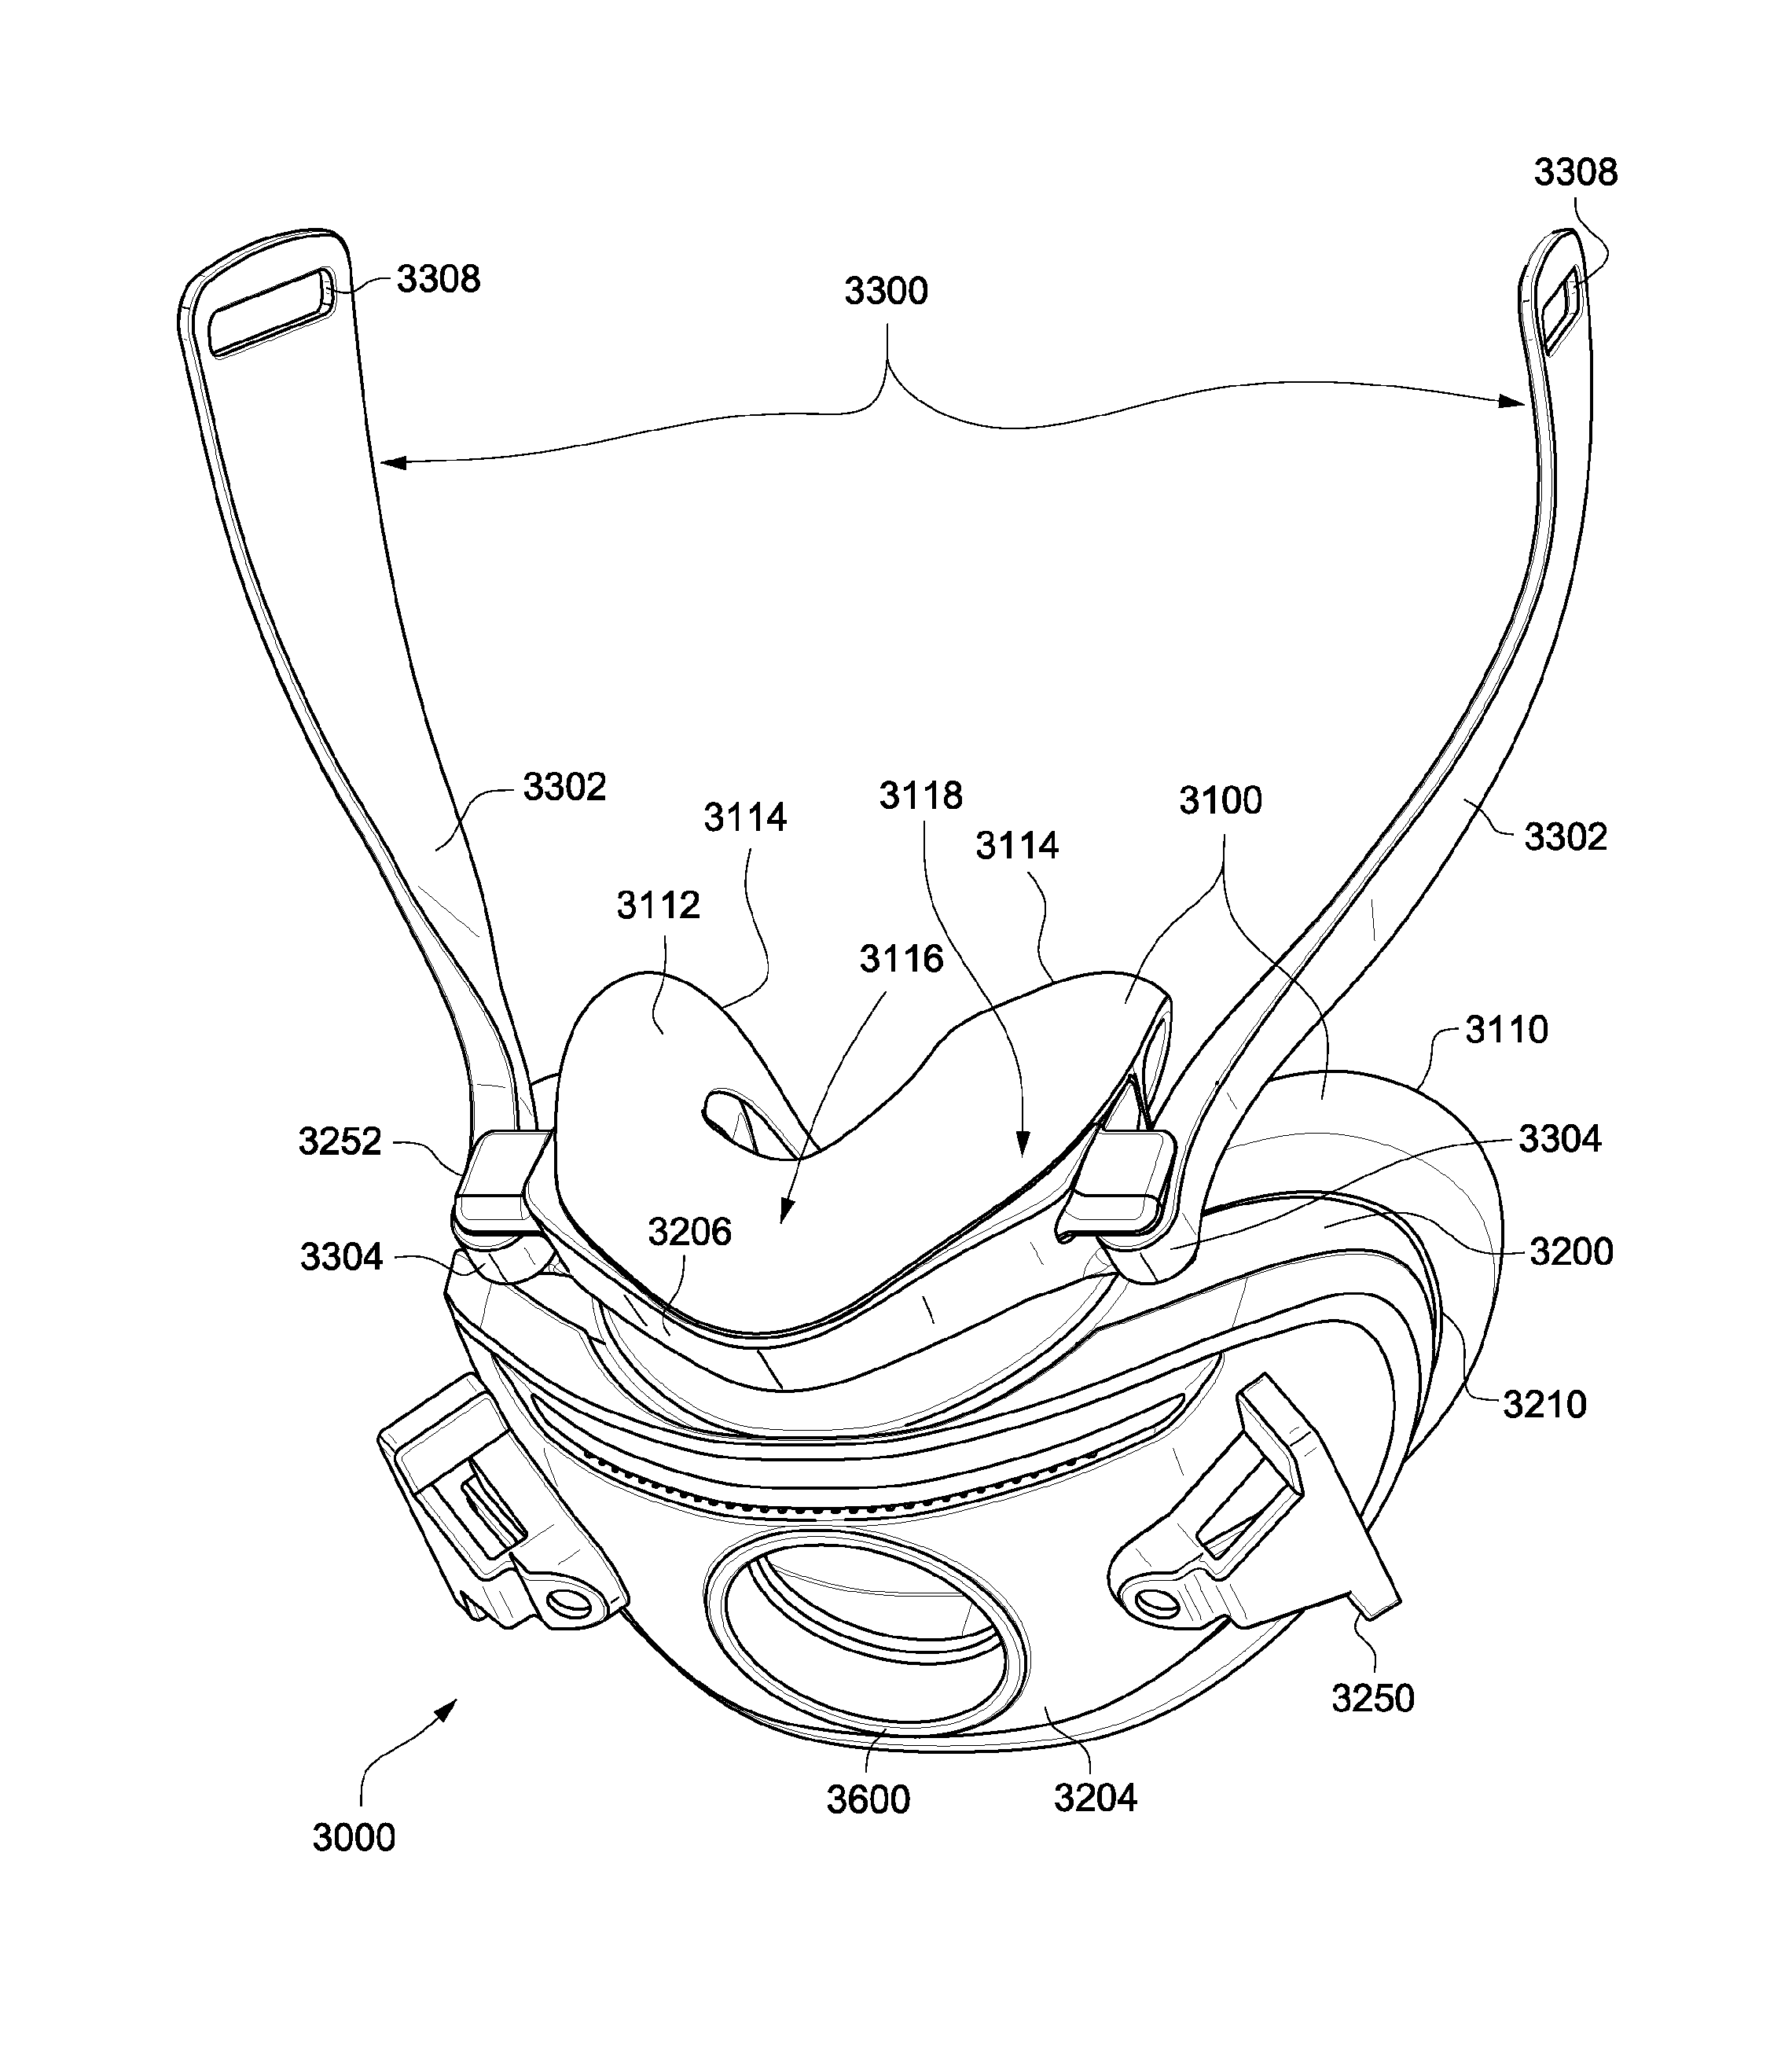 Oro-nasal patient interface